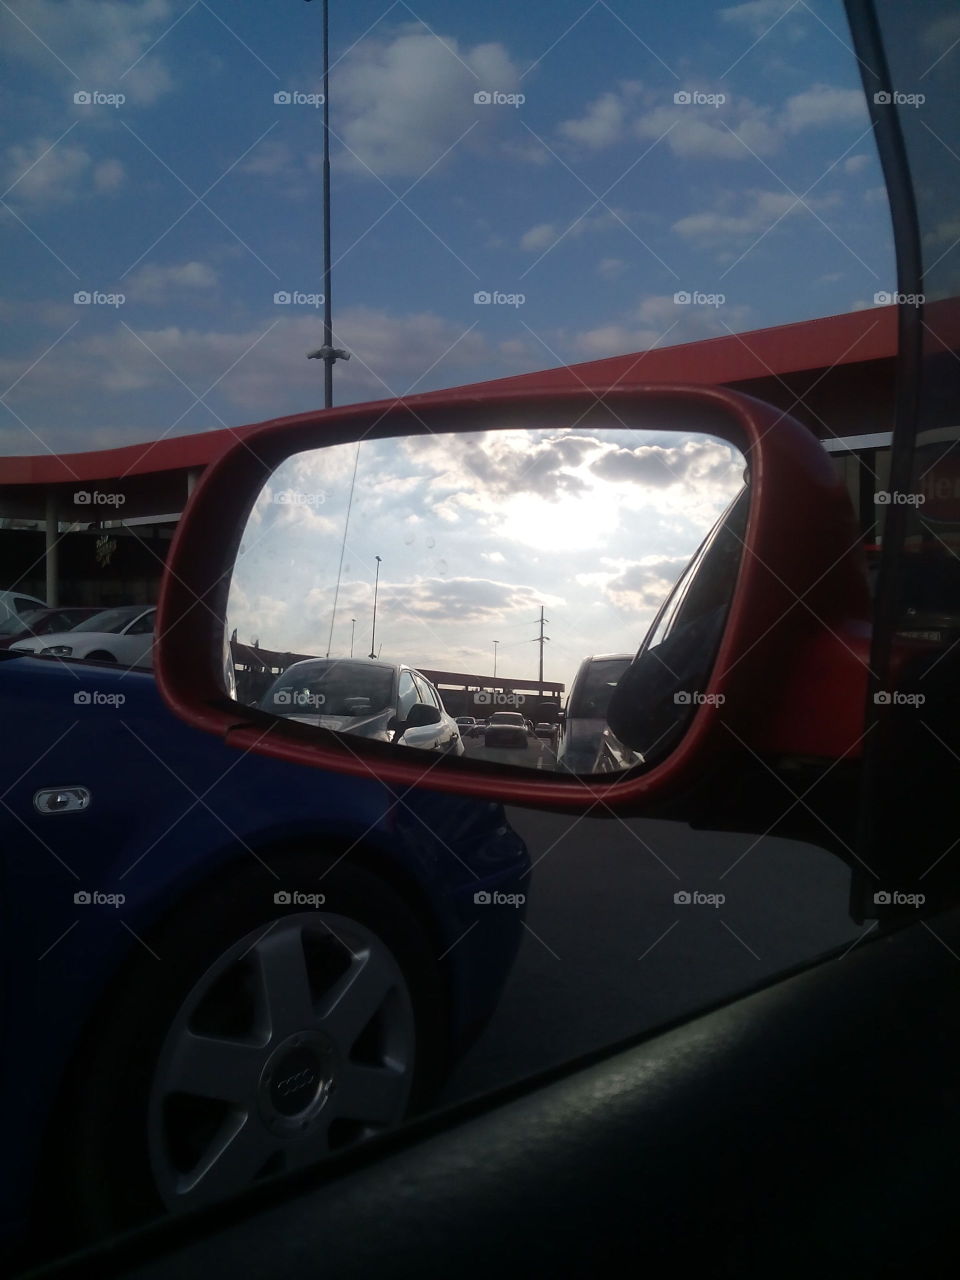 View from the rearview mirror